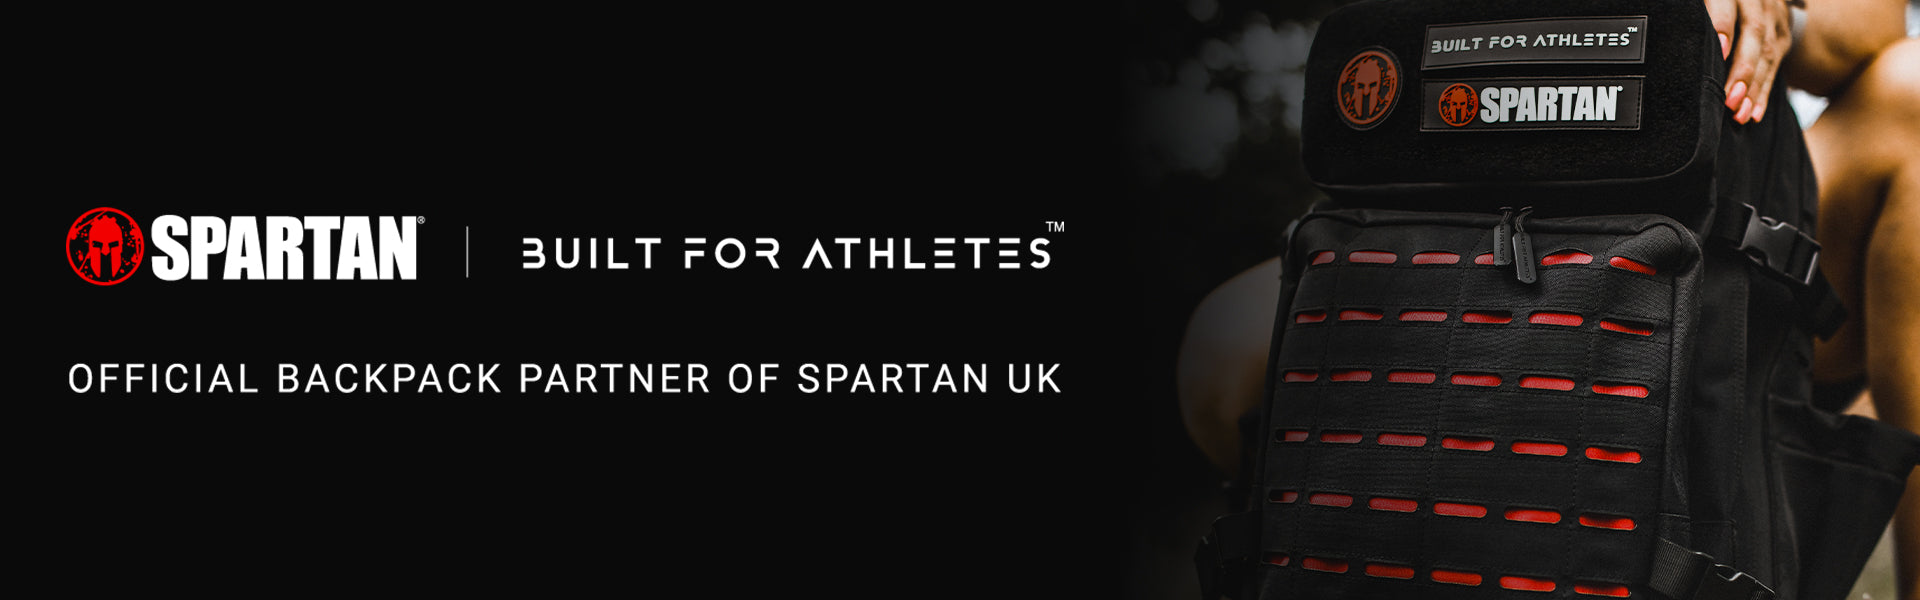 Built For Athletes and Spartan Backpack Available for Pre-Order